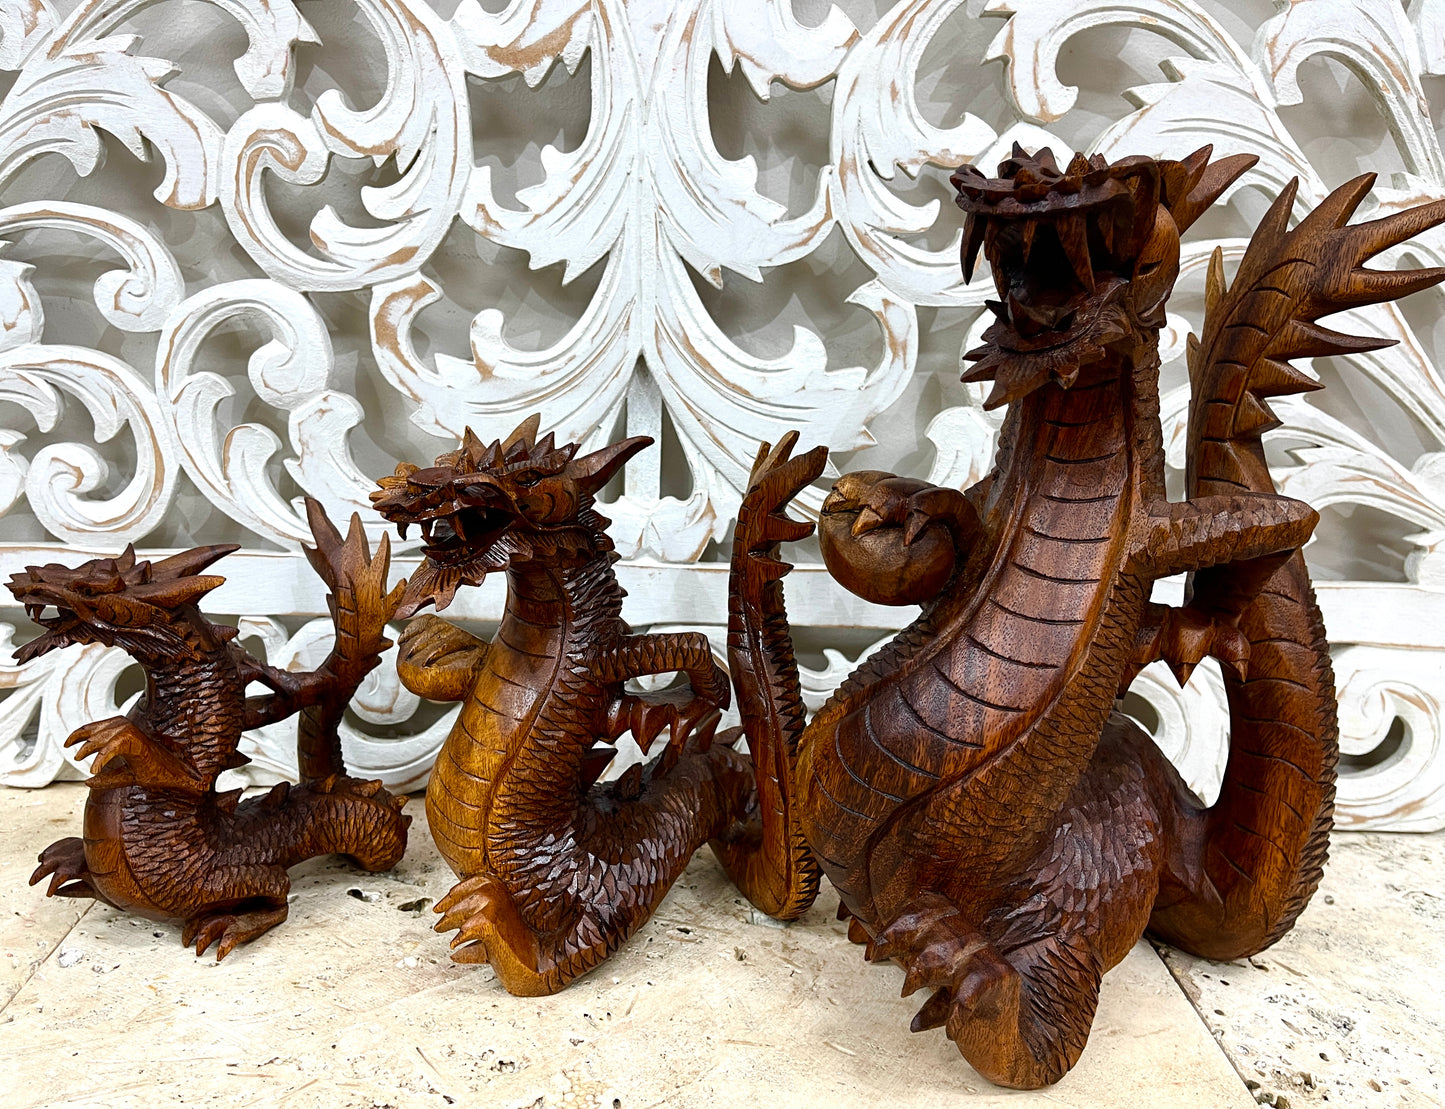 Dragon Intricate Wood carvings - 3 Sizes Available